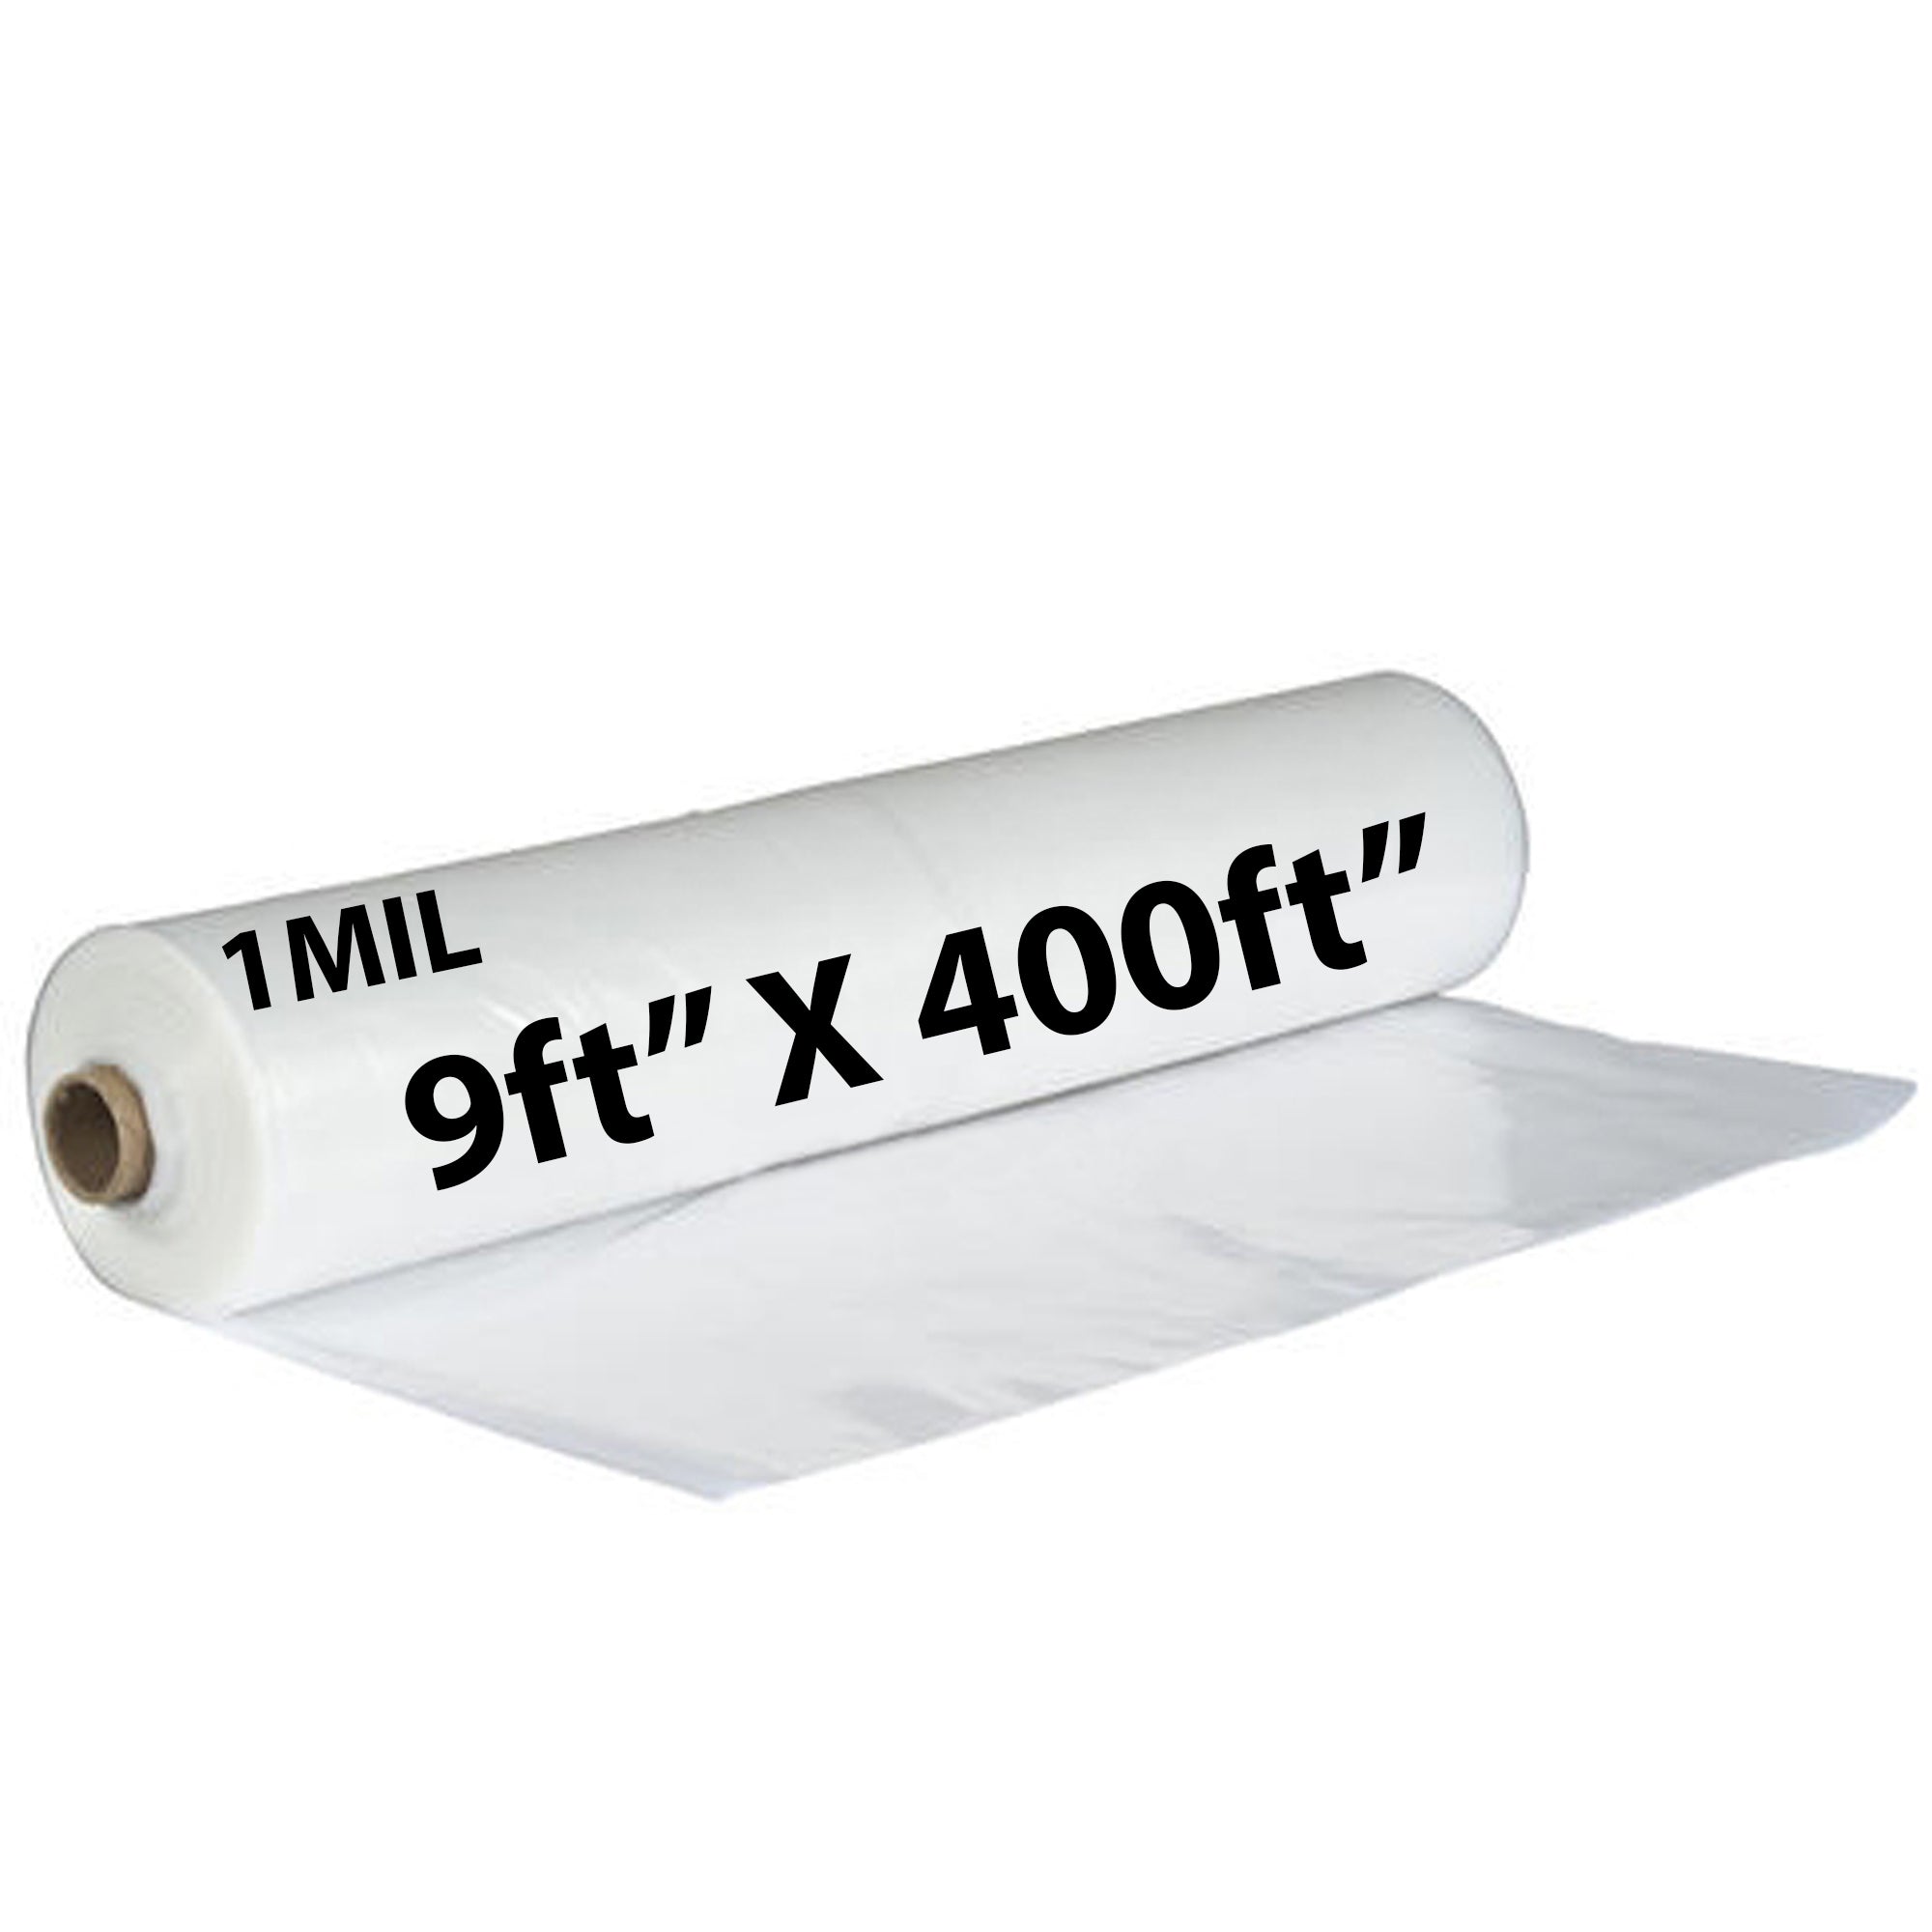 Clear Poly Sheeting Tarp 1Mil 9ftx400ft Thick Frosted Plastic Tarp